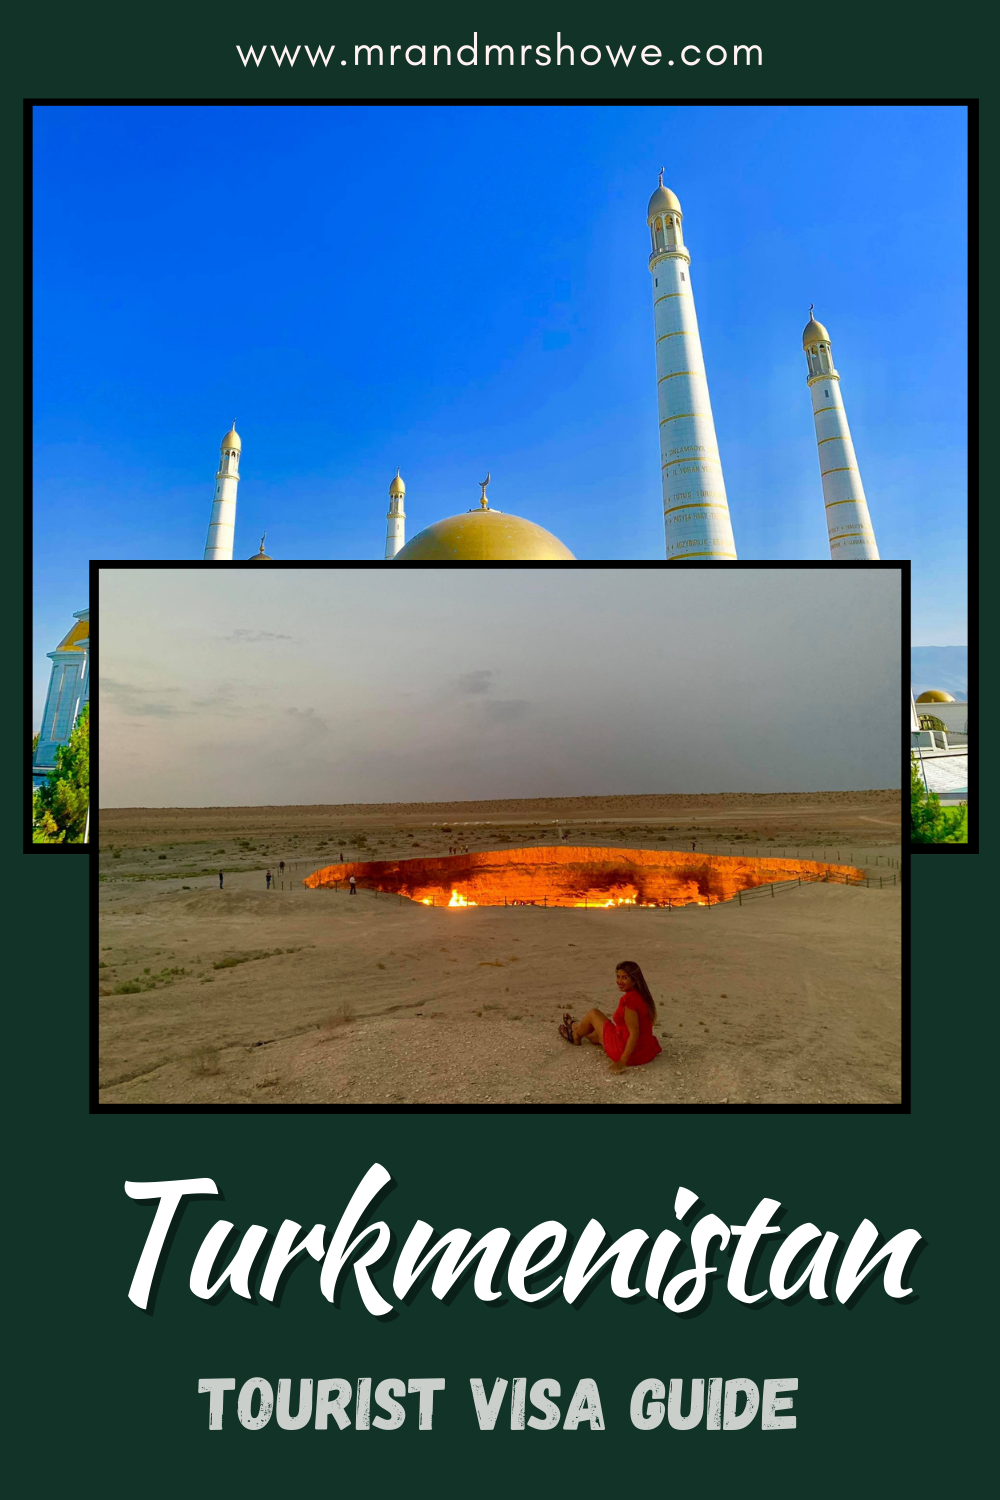 How To Get Turkmenistan Tourist Visa With Your Philippines Passport [Tourist Visa Guide For Turkmenistan]1.png